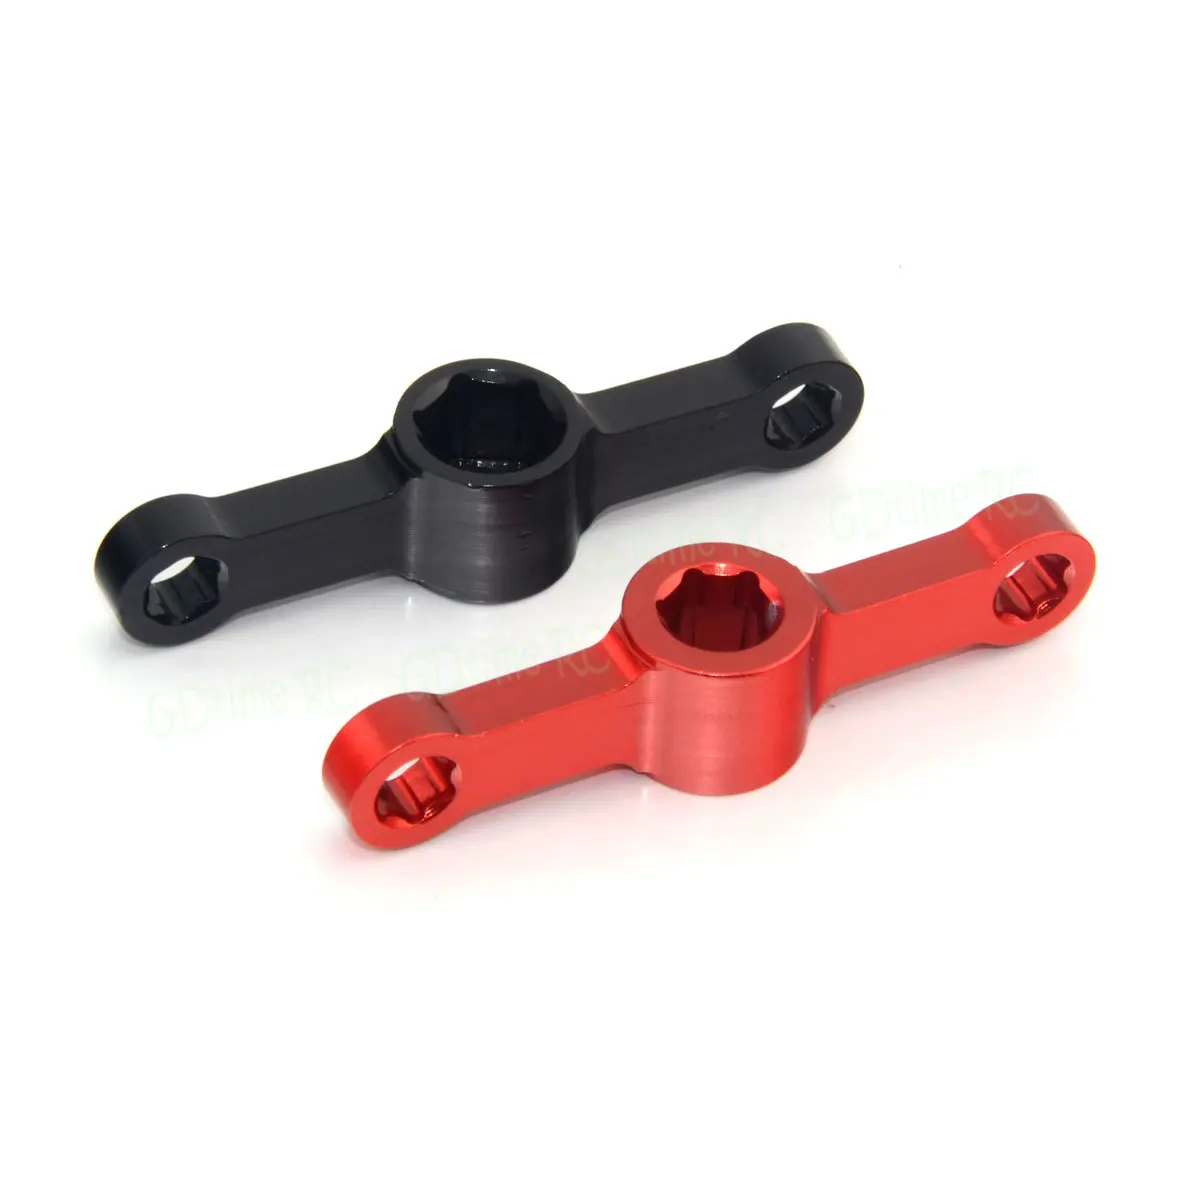 M3/M4/M5 Lock Nuts Props Adapter 2204 Brushless Motor Bullet Cap Quick Cap/Propeller Removal Tool for Quadcopter Drone FPV UAV